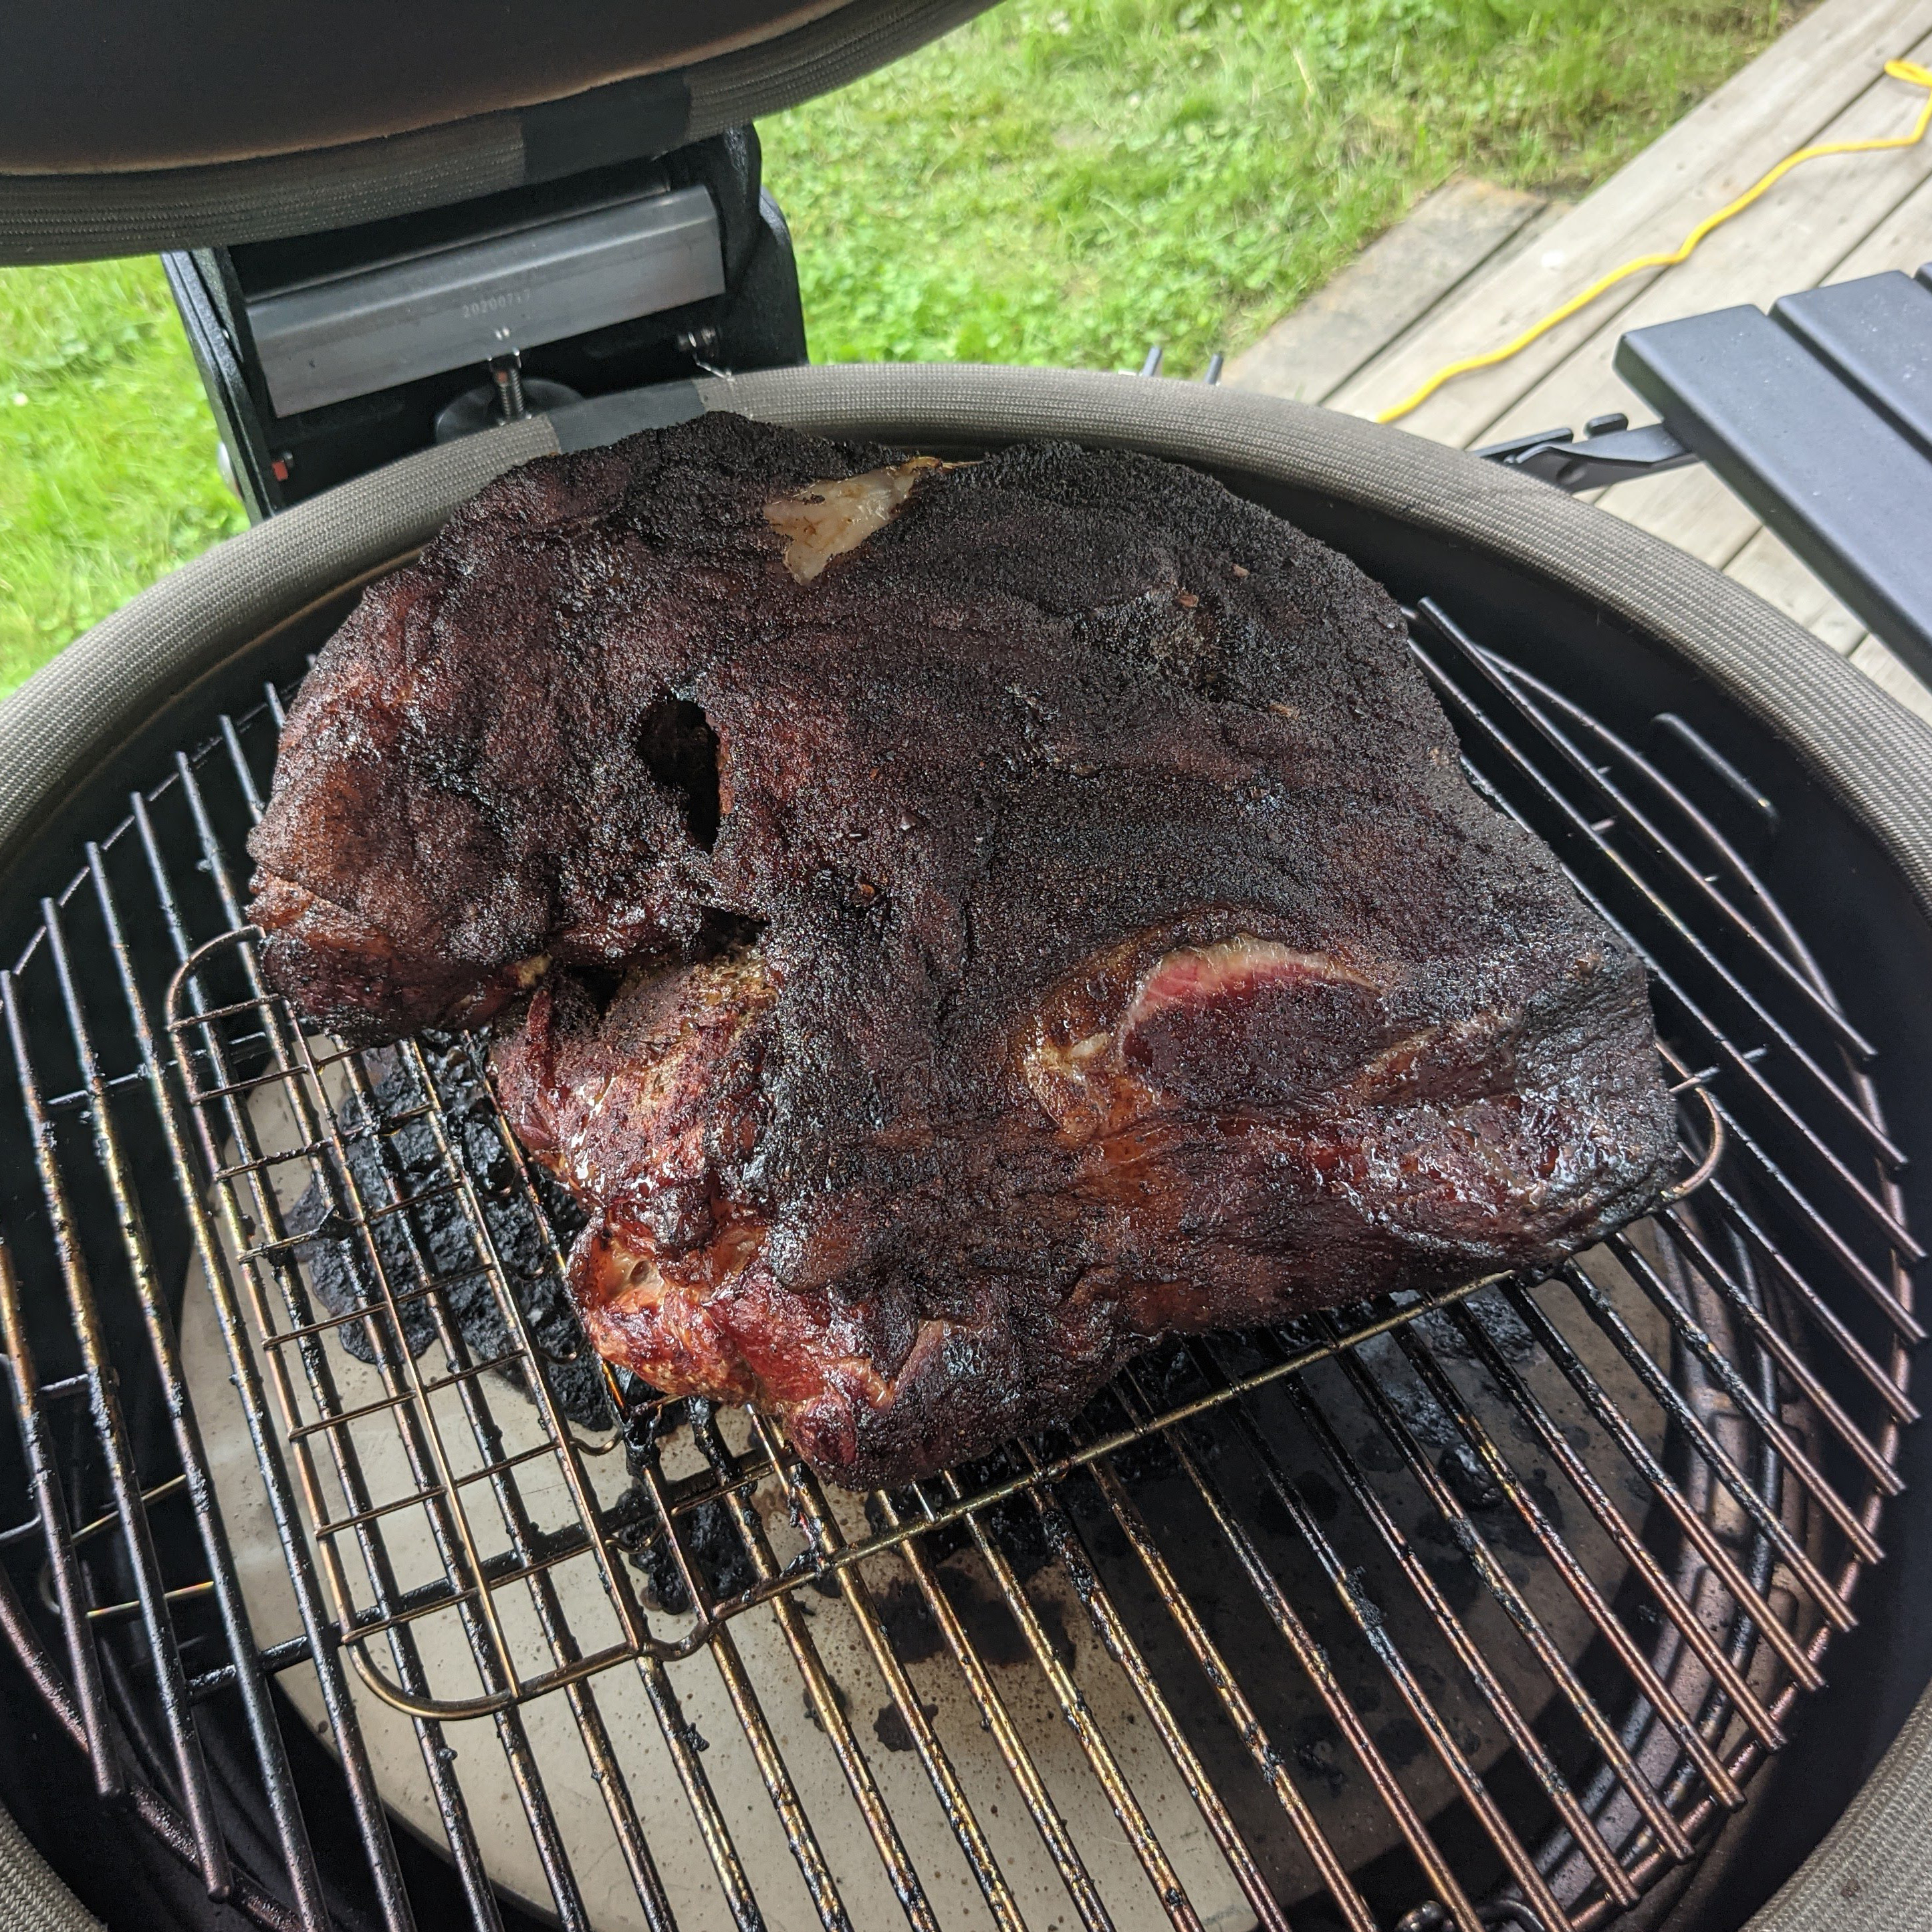 The first pulled pork shoulder I ever smoked.